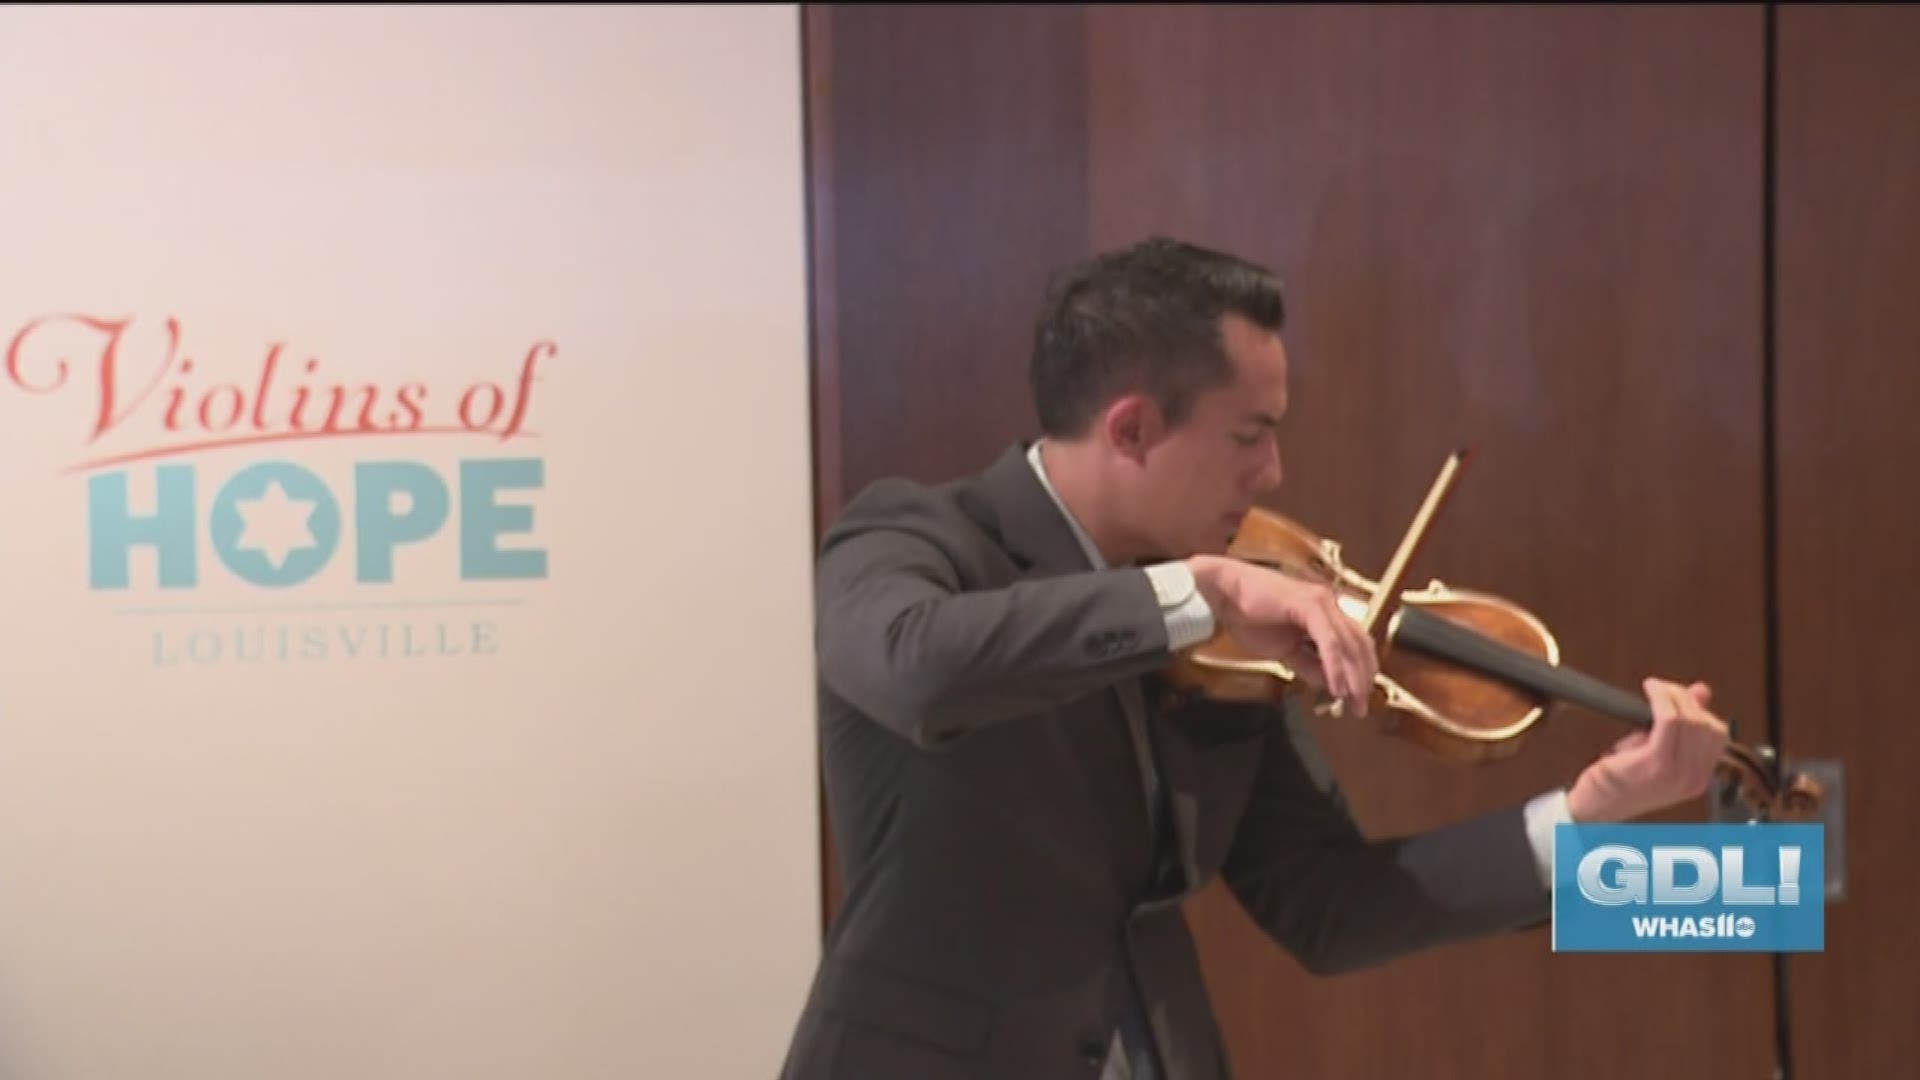 Moved By Music: Violins of Hope is October 20, 2019 at the Frazier History Museum, which is located at 829 West Main Street in Louisville, KY.